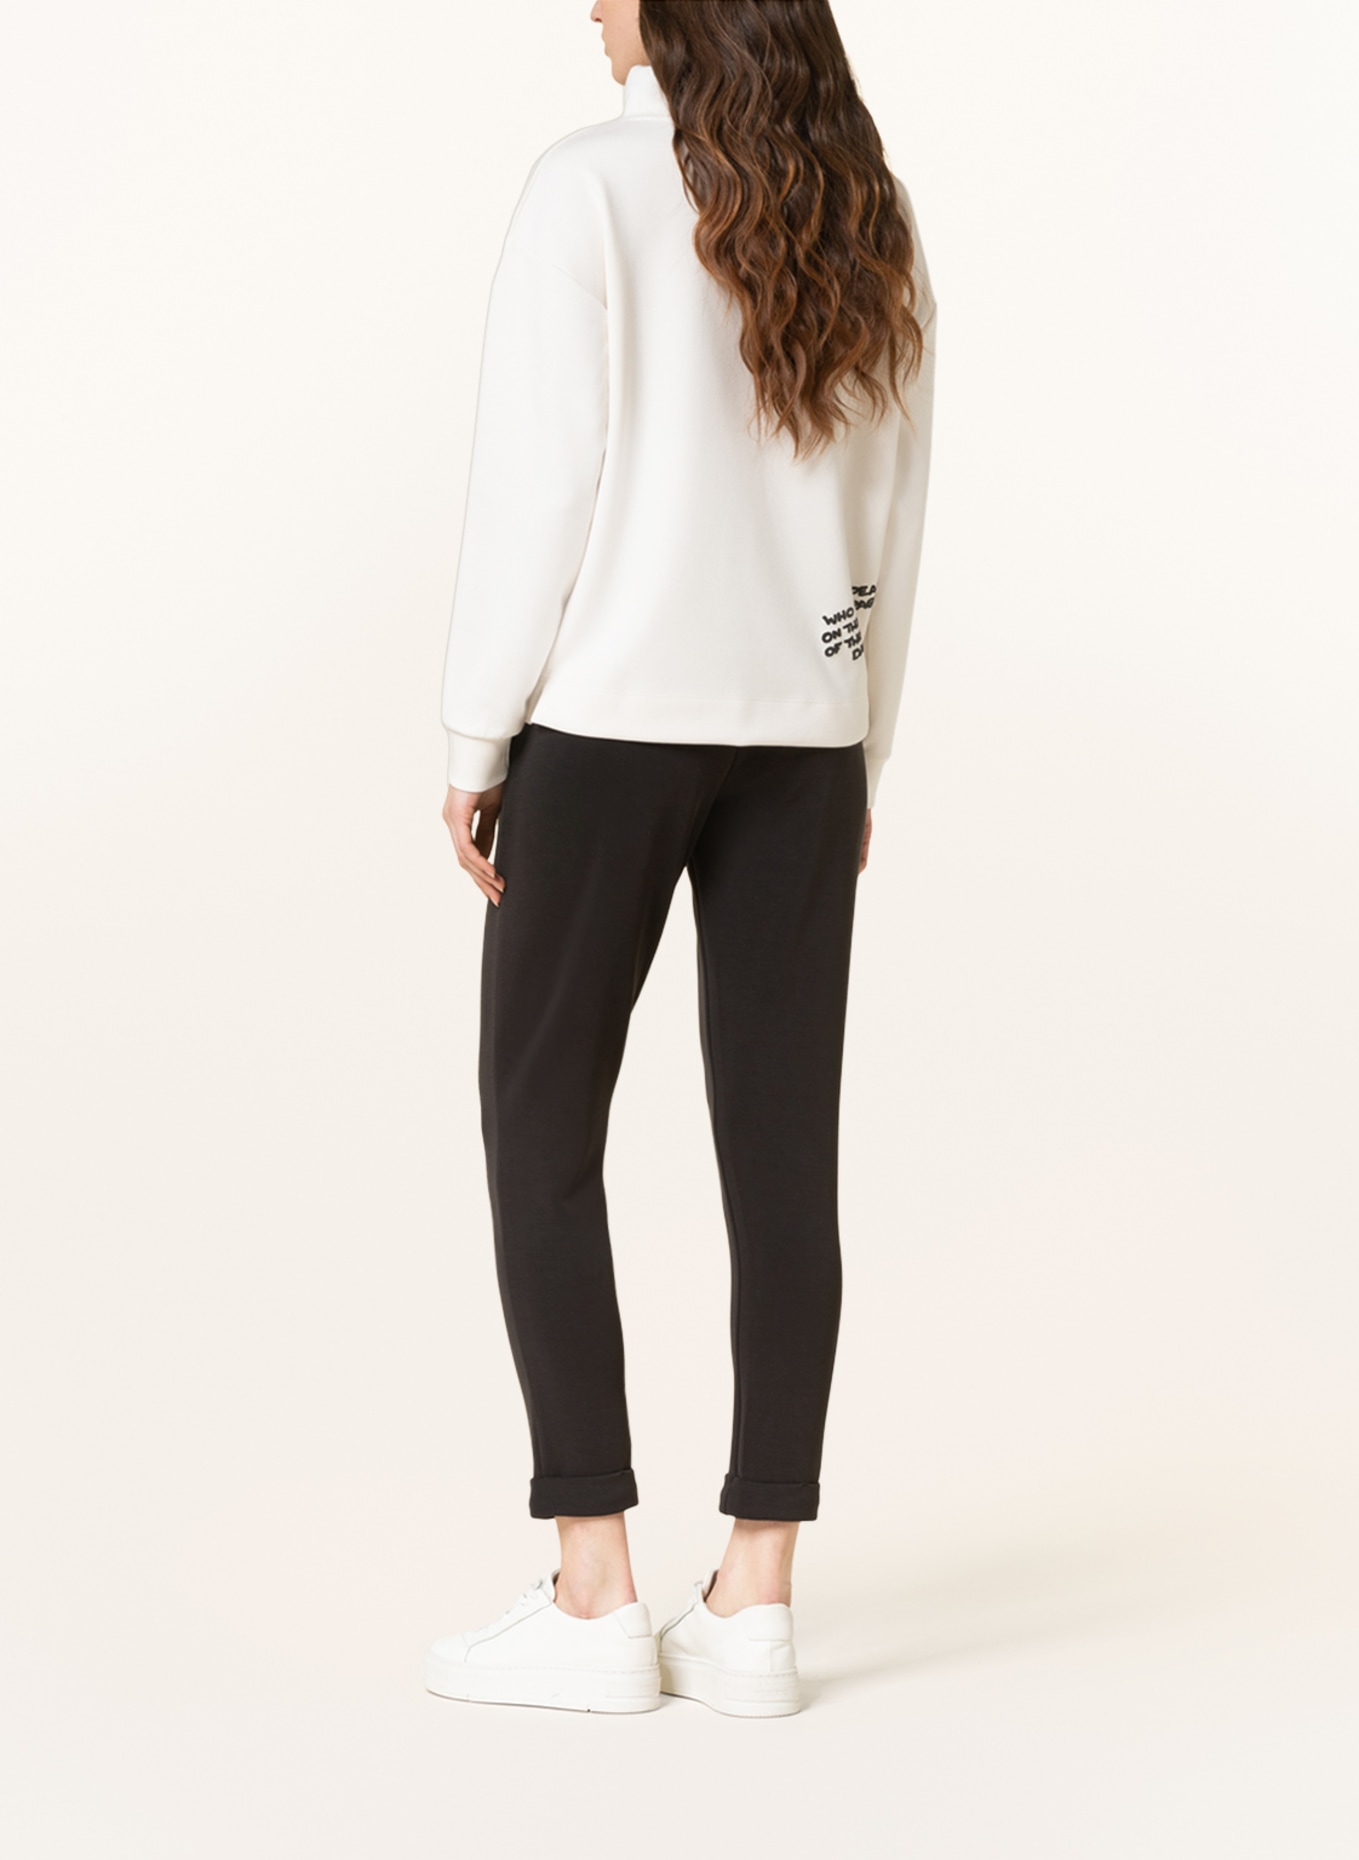 Princess GOES HOLLYWOOD Pants in jogger style, Color: BLACK (Image 3)